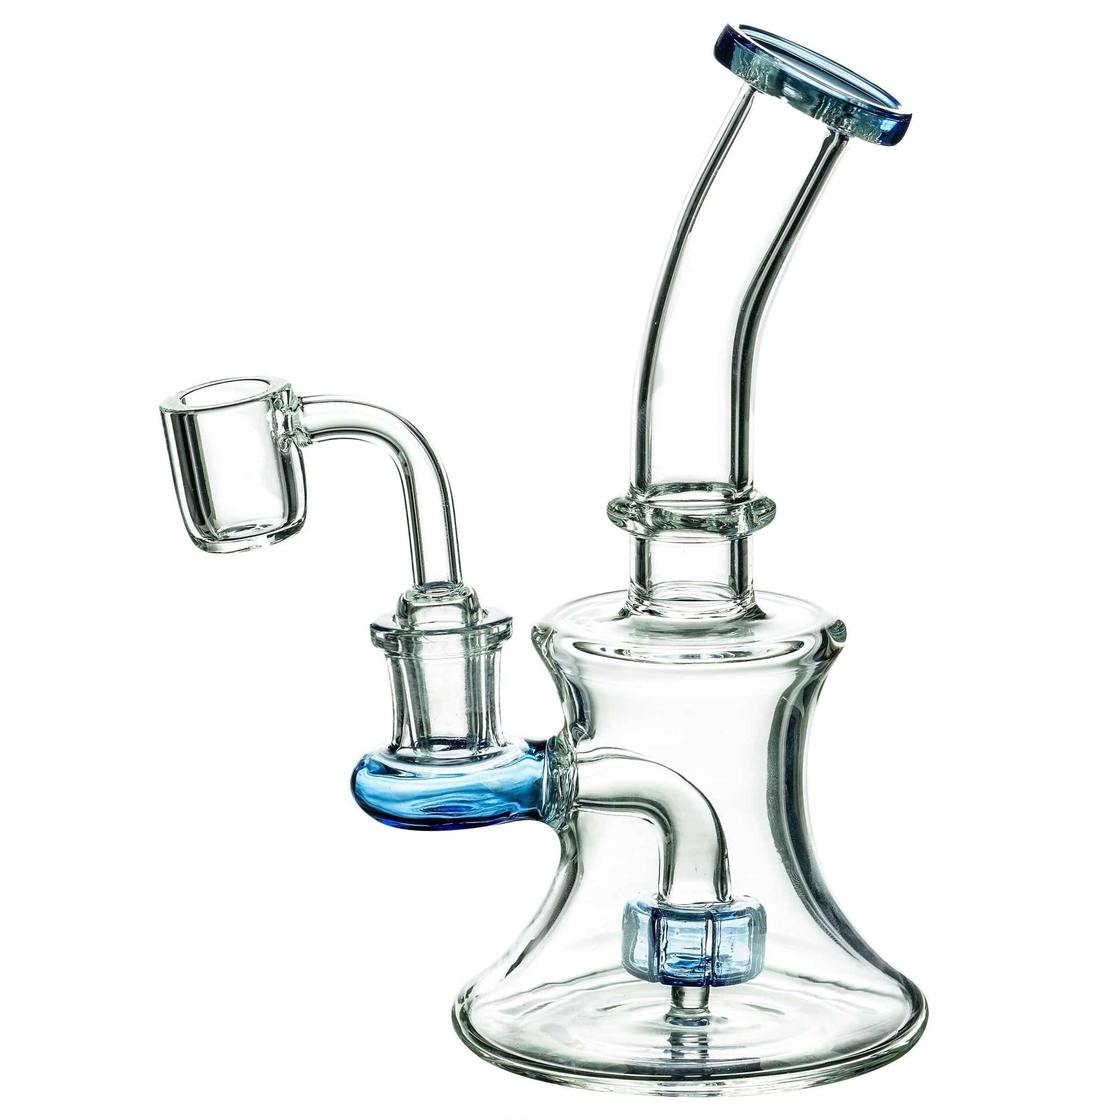 https://www.grasscity.com/media/catalog/product/d/a/dankstop-hourglass-dab-rig-with-colored-accents-28756606_1120x1120_1.jpeg